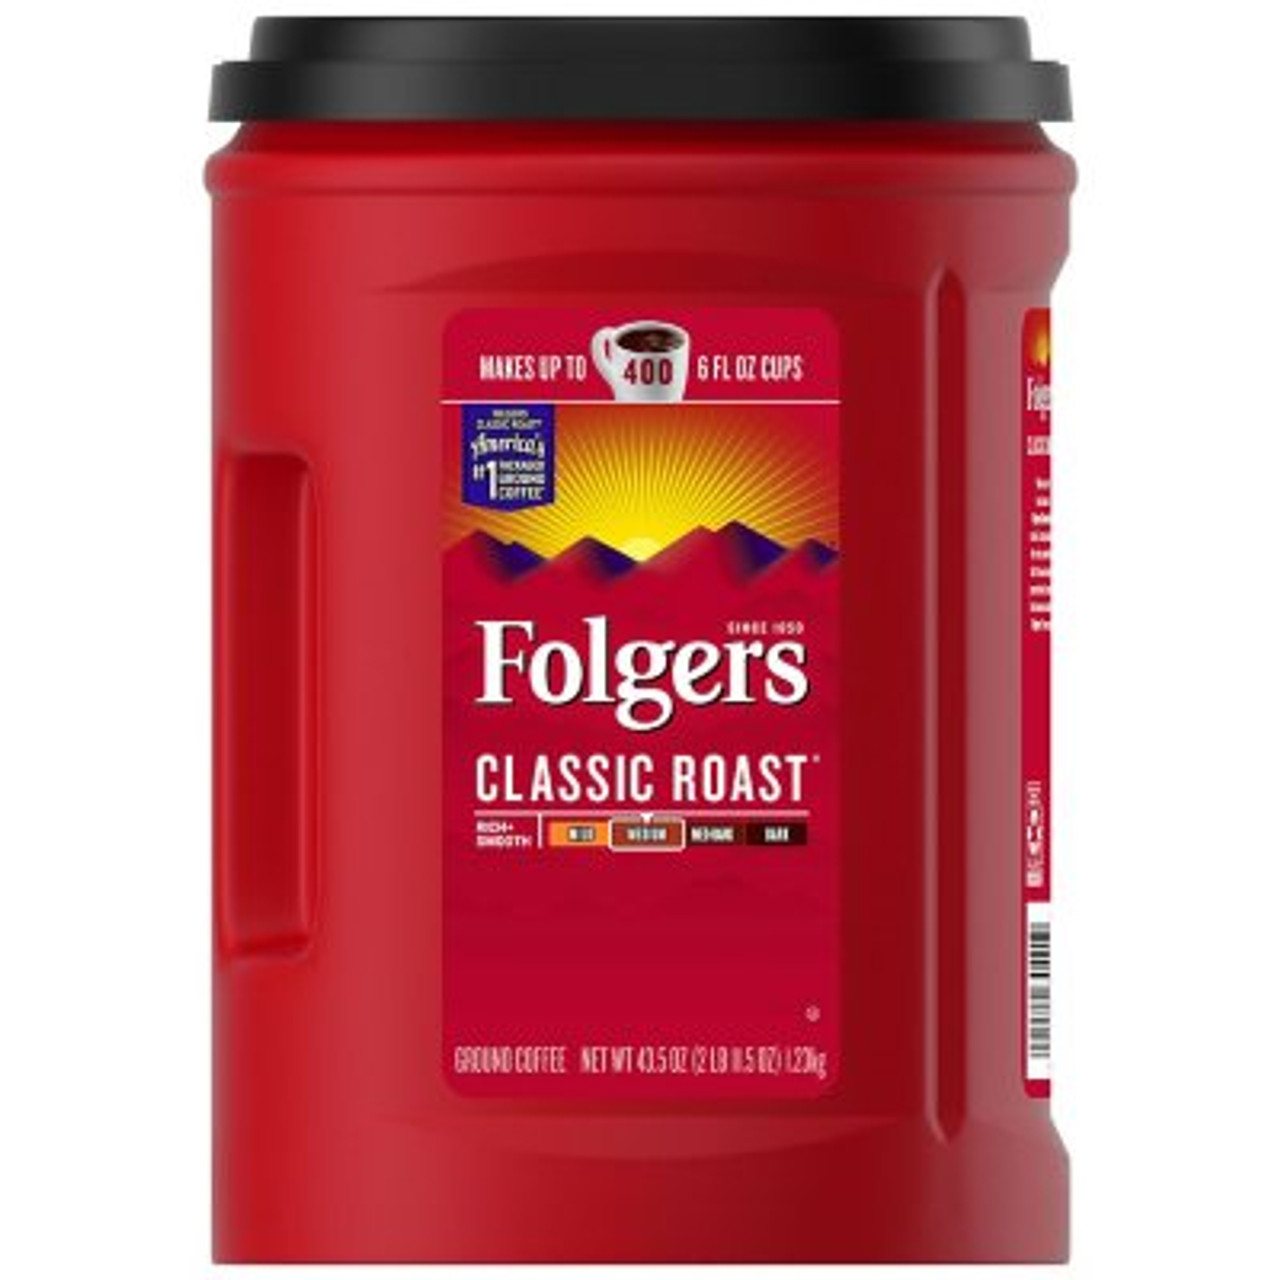 Folgers Classic Roast Ground Coffee (43.5 oz.) - *In Store